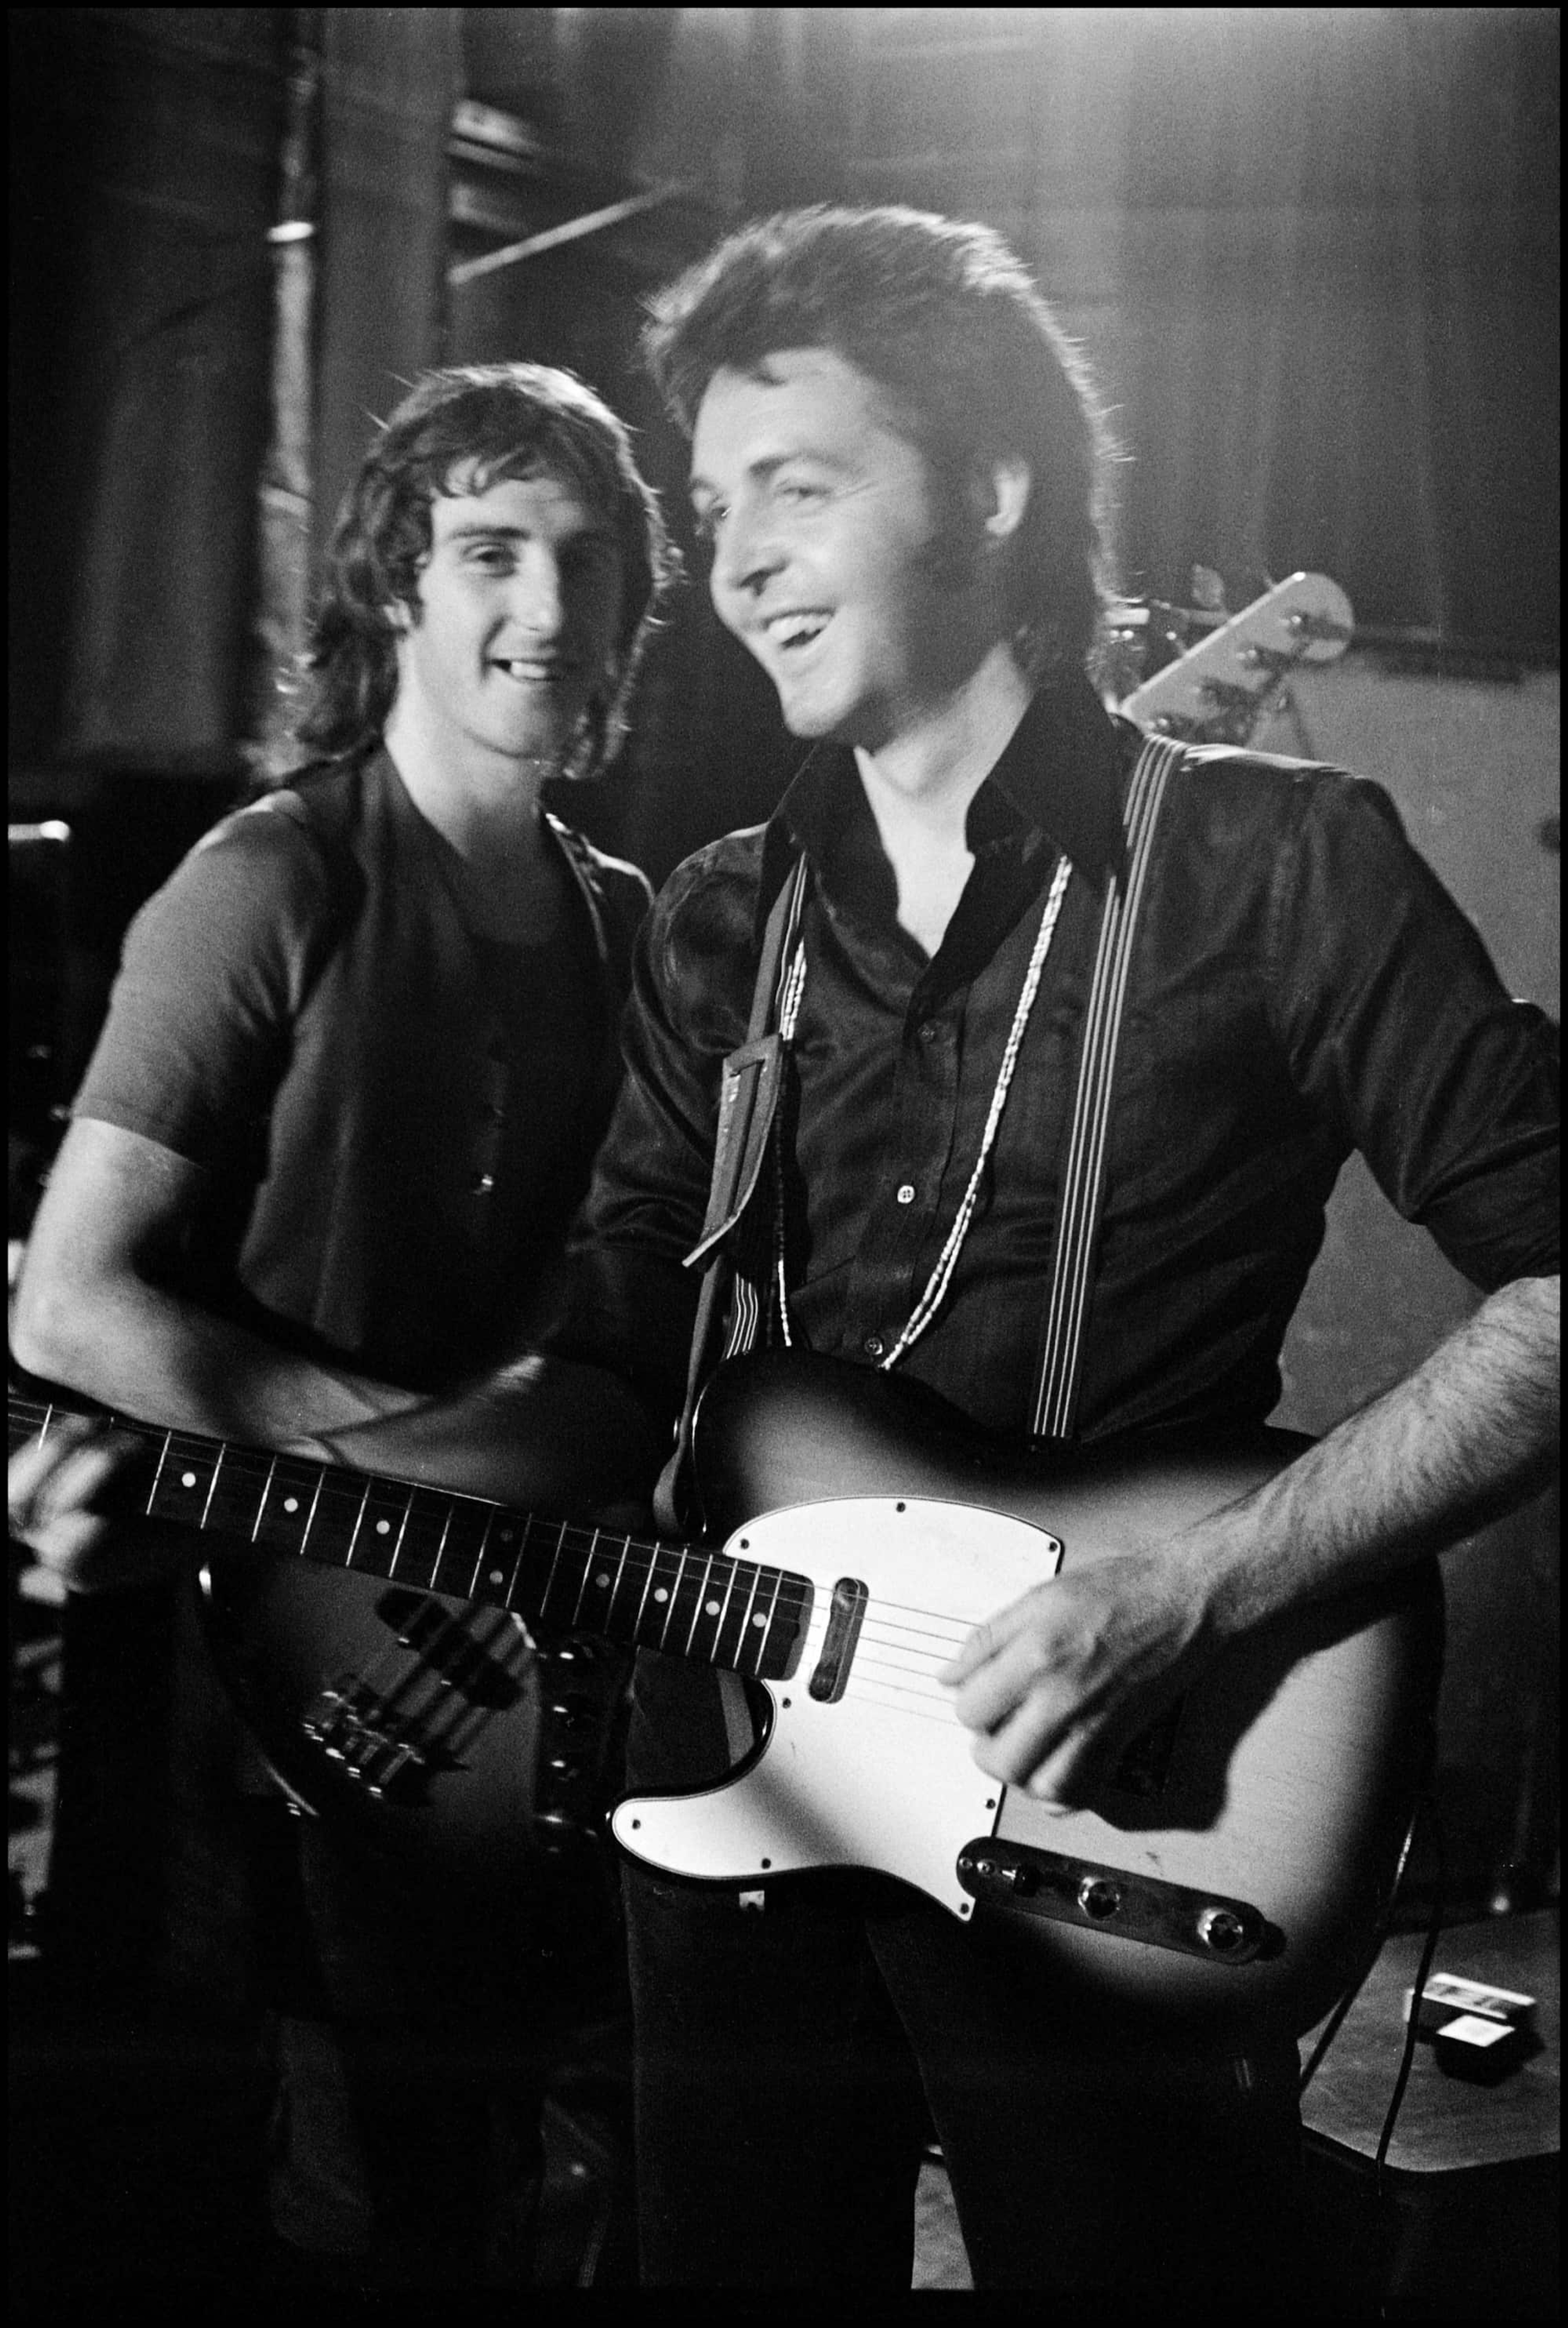 Photo of Paul and Denny Laine taken by Linda McCartney